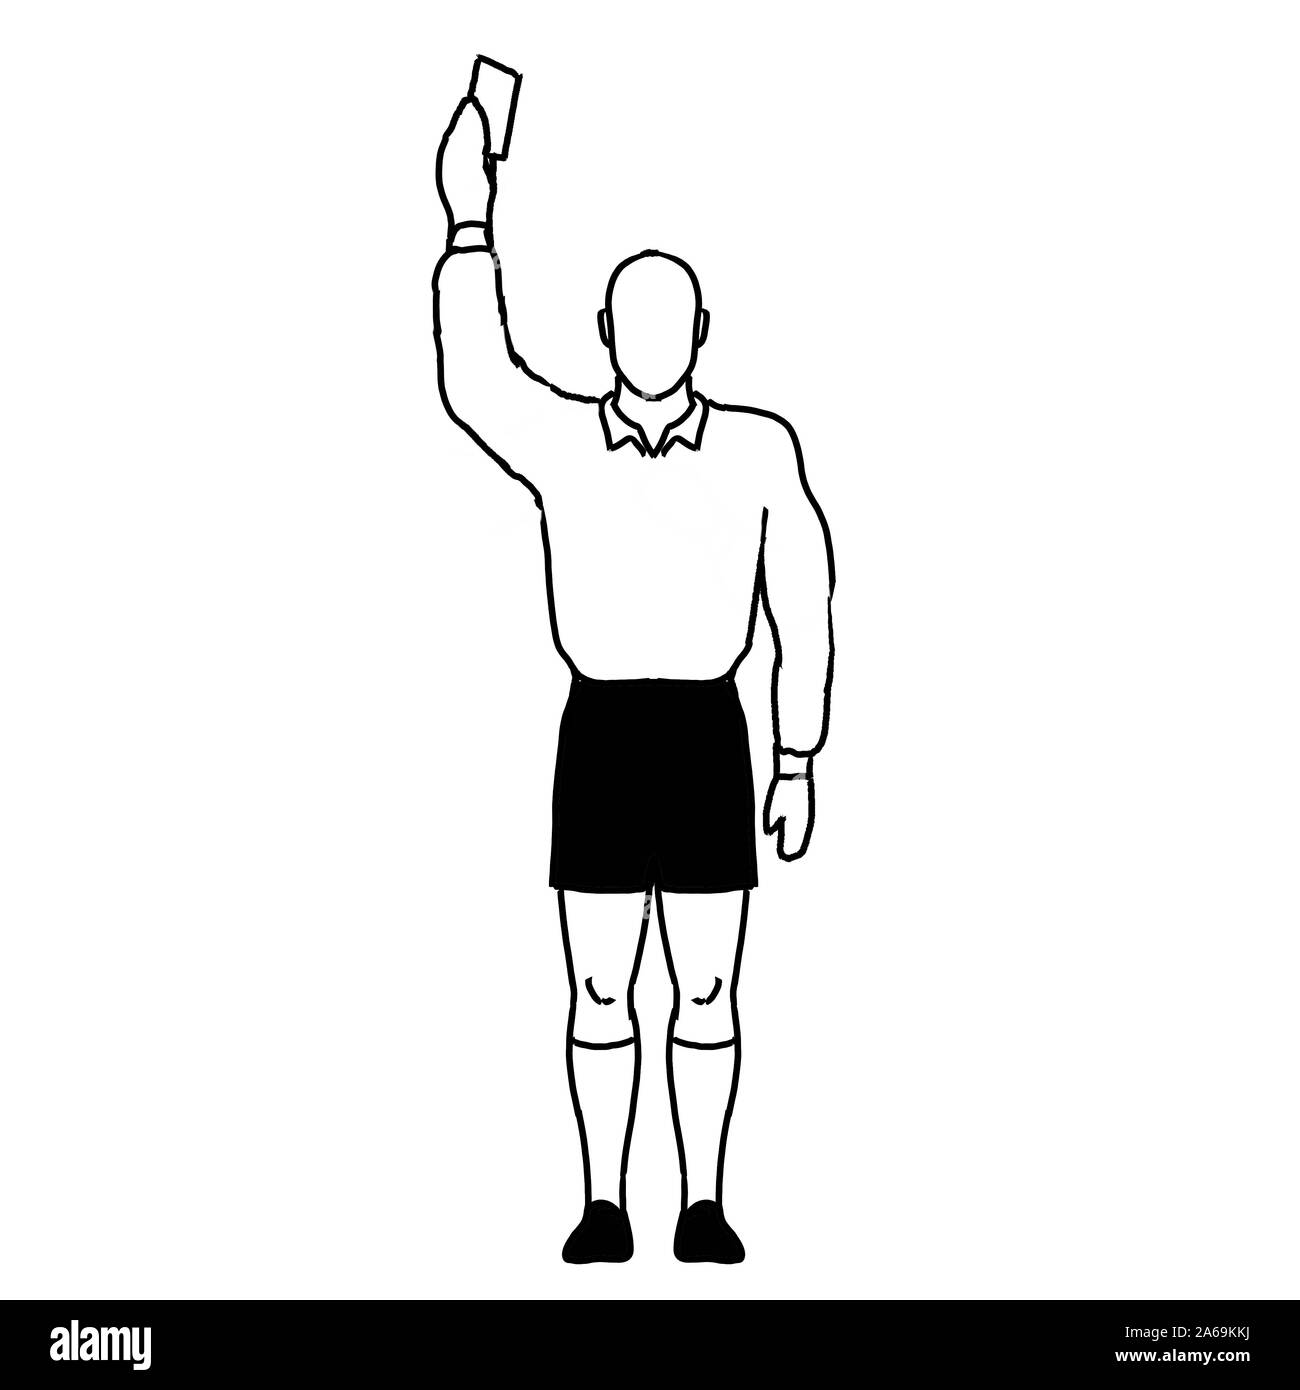 Retro style line drawing illustration showing a rugby referee with penalty Red Card Sending Off or Yellow Card Caution hand signal on isolated backgro Stock Photo